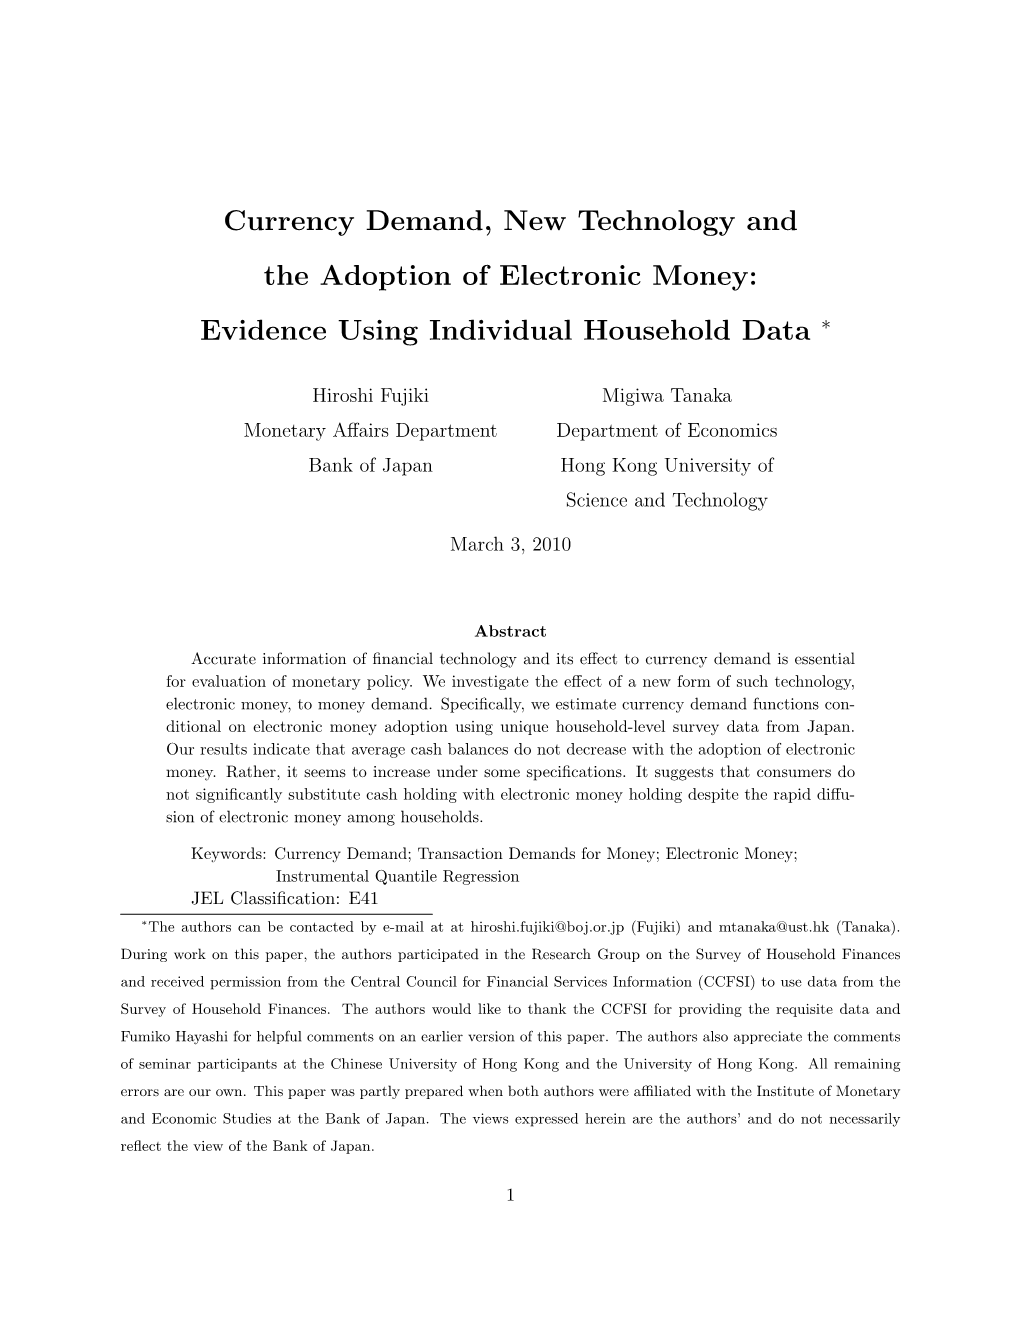 Currency Demand, New Technology and the Adoption of Electronic Money: Evidence Using Individual Household Data ∗